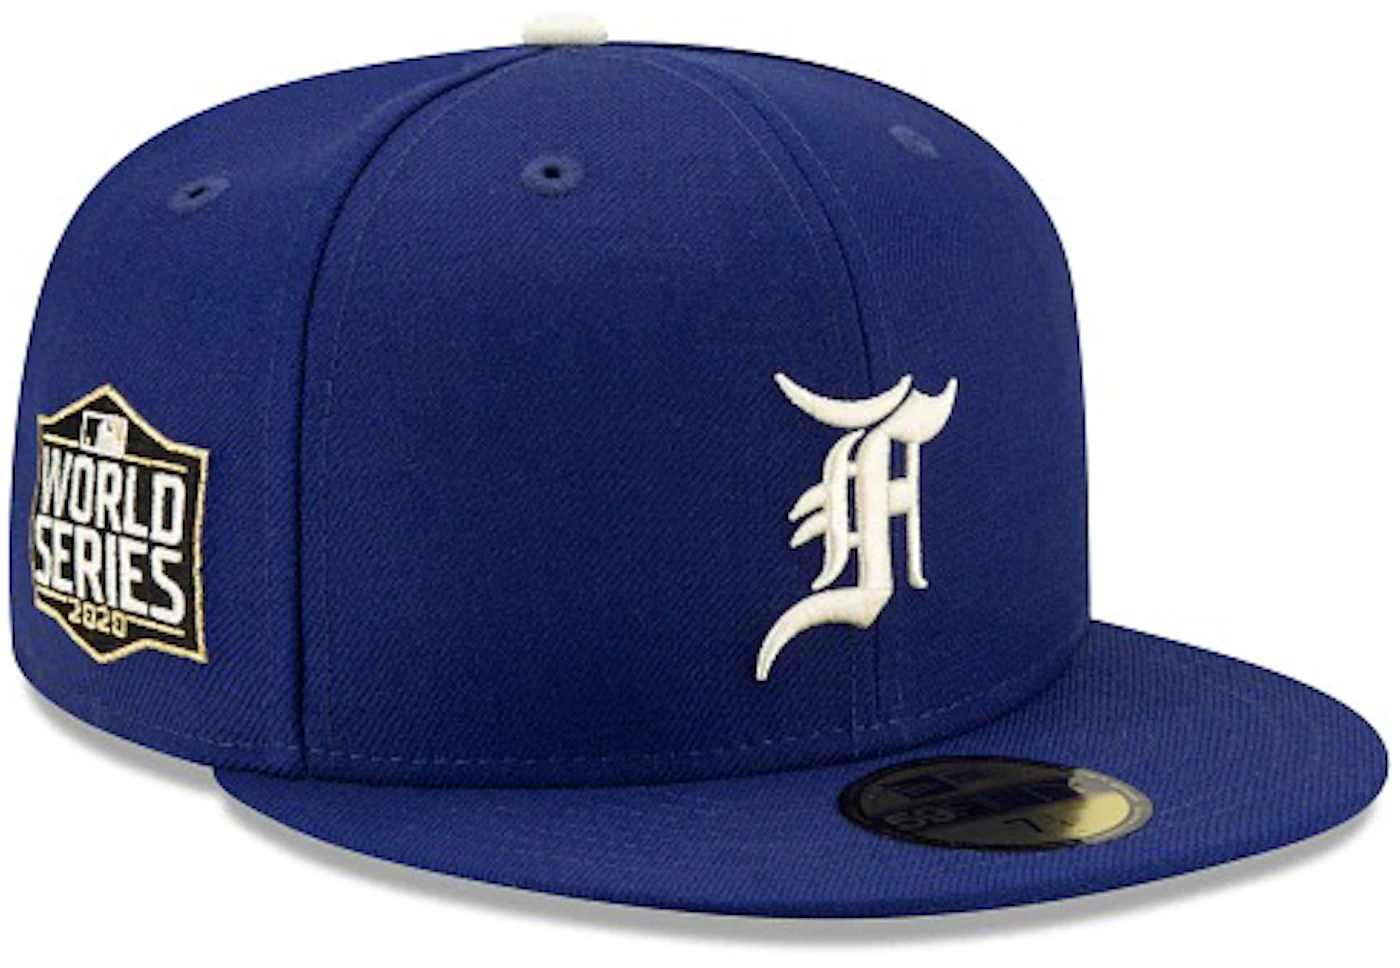 Men's New Era Royal MLB Fear of God Essentials 59FIFTY Fitted Hat